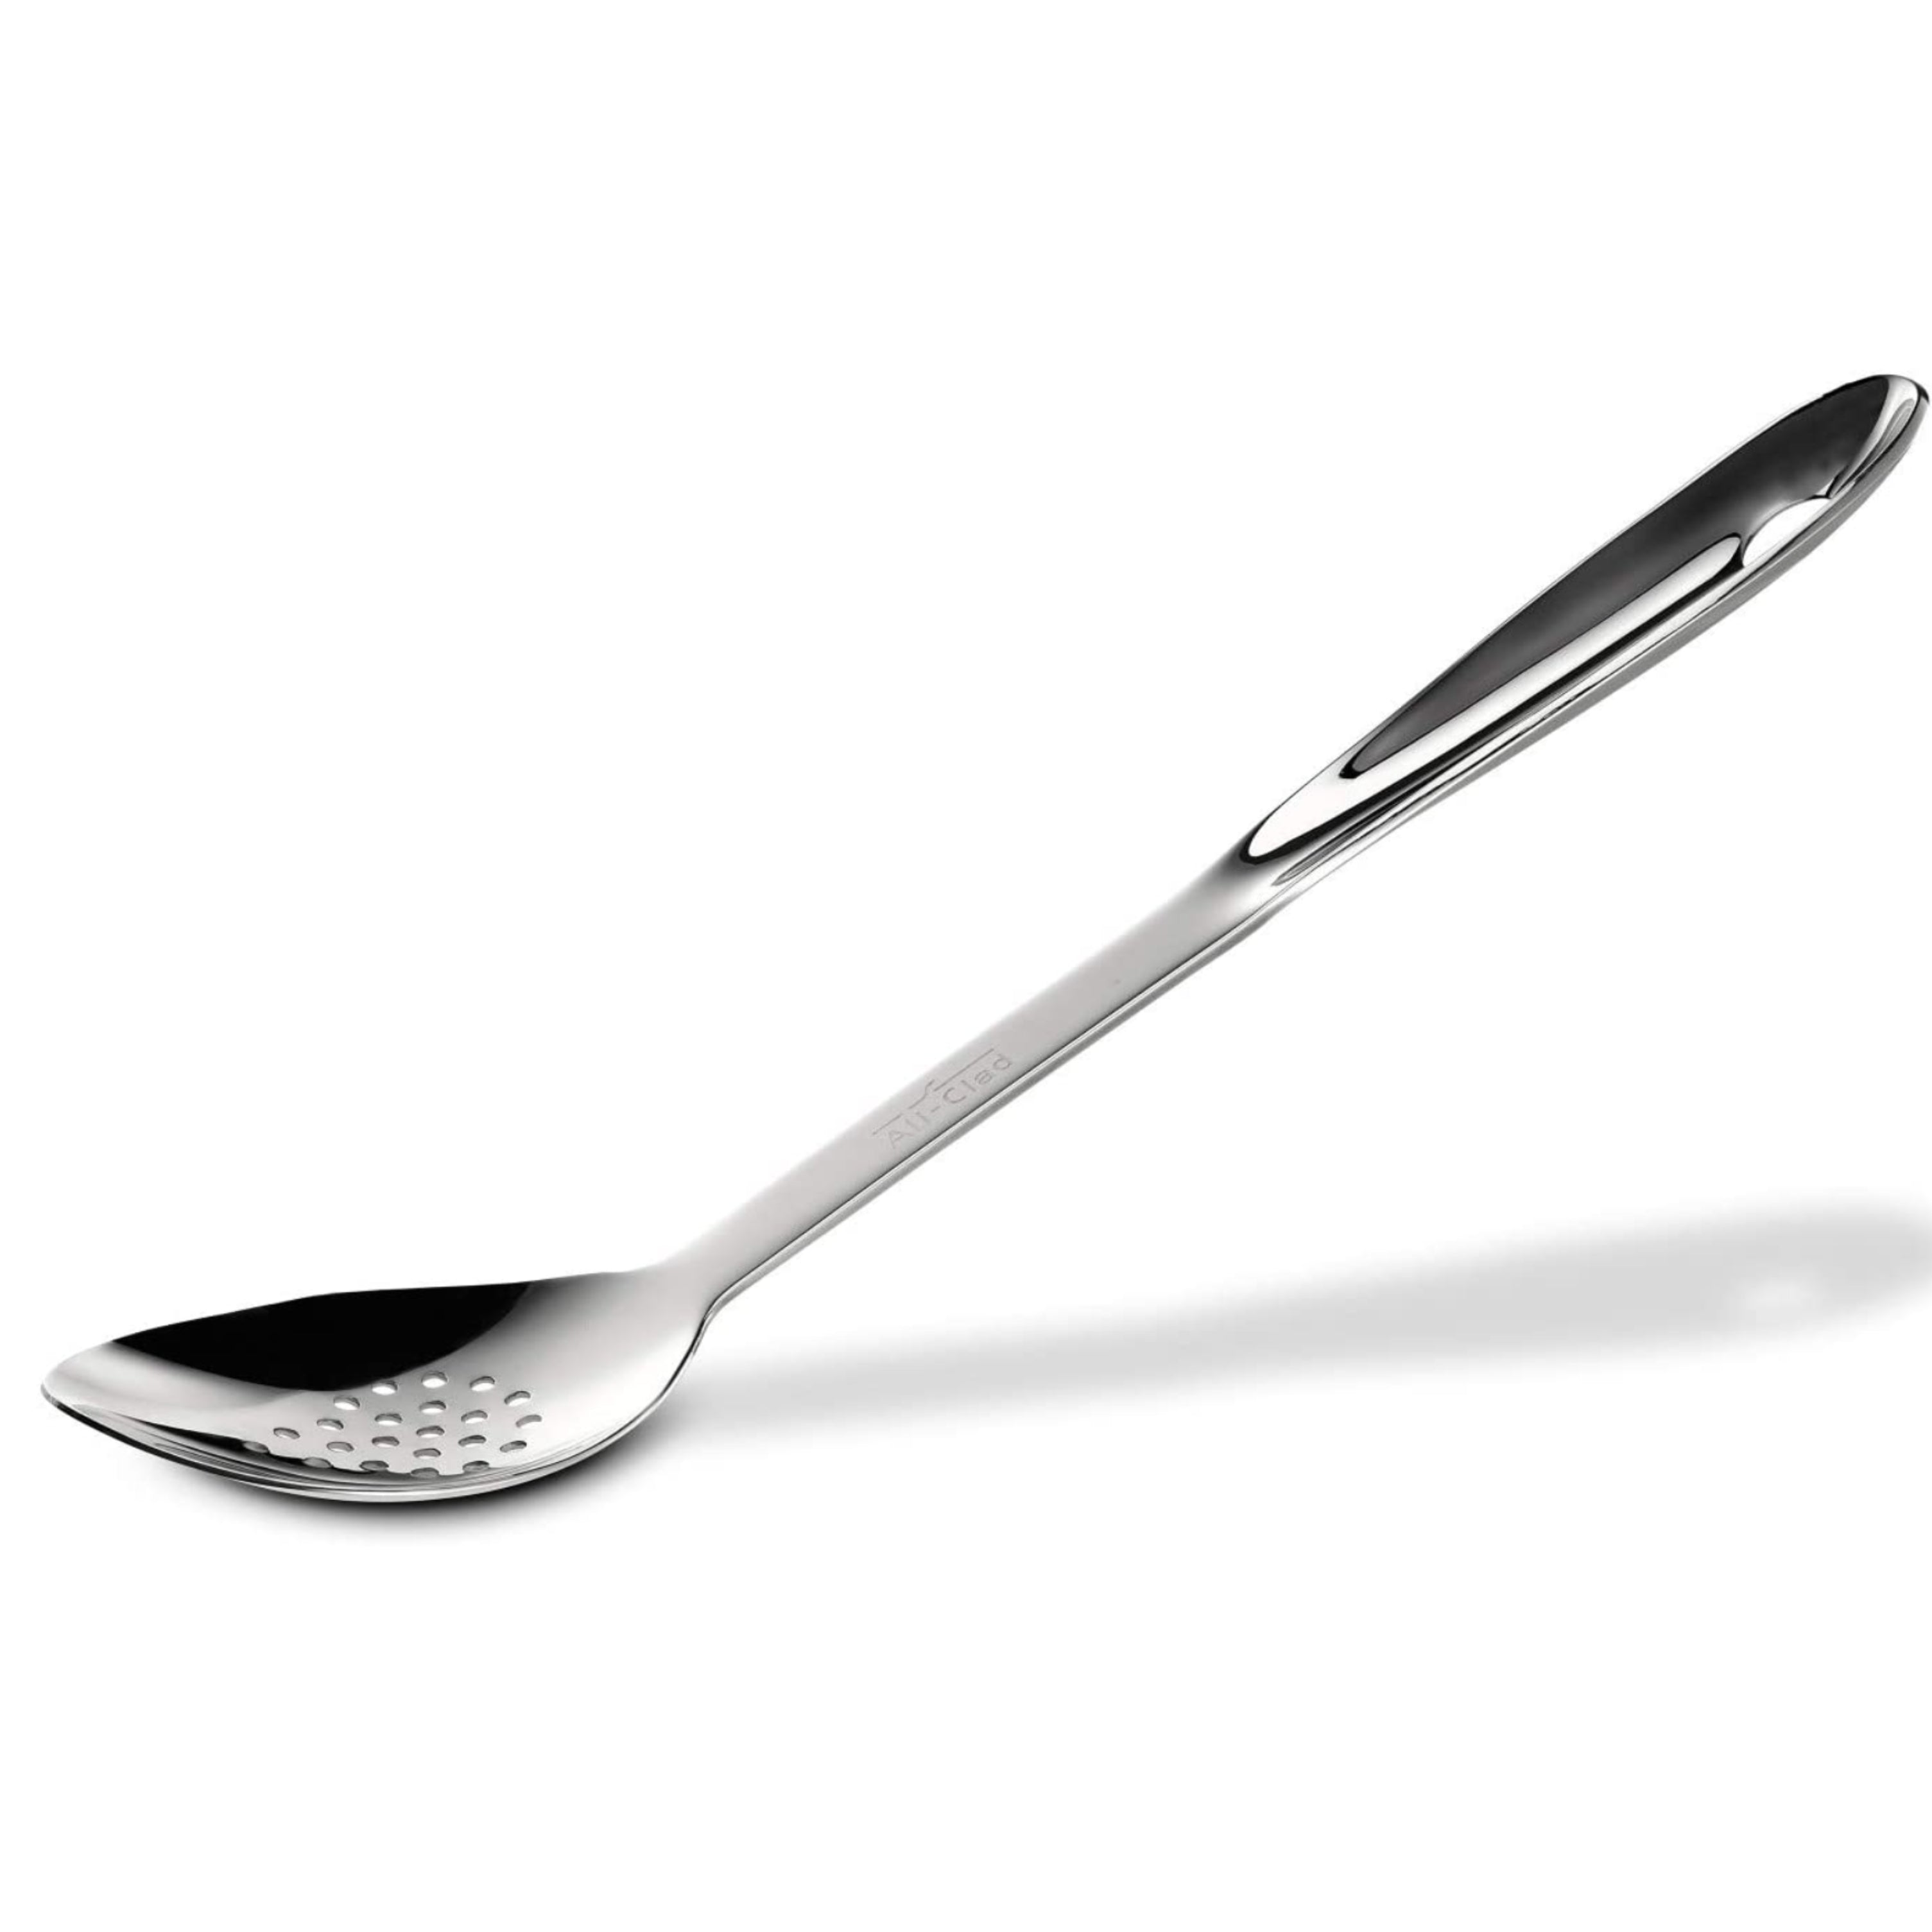 All-Clad Stainless Steel All-Clad T101 Stainless Steel Slotted Spoon Kitchen Tool – 13"